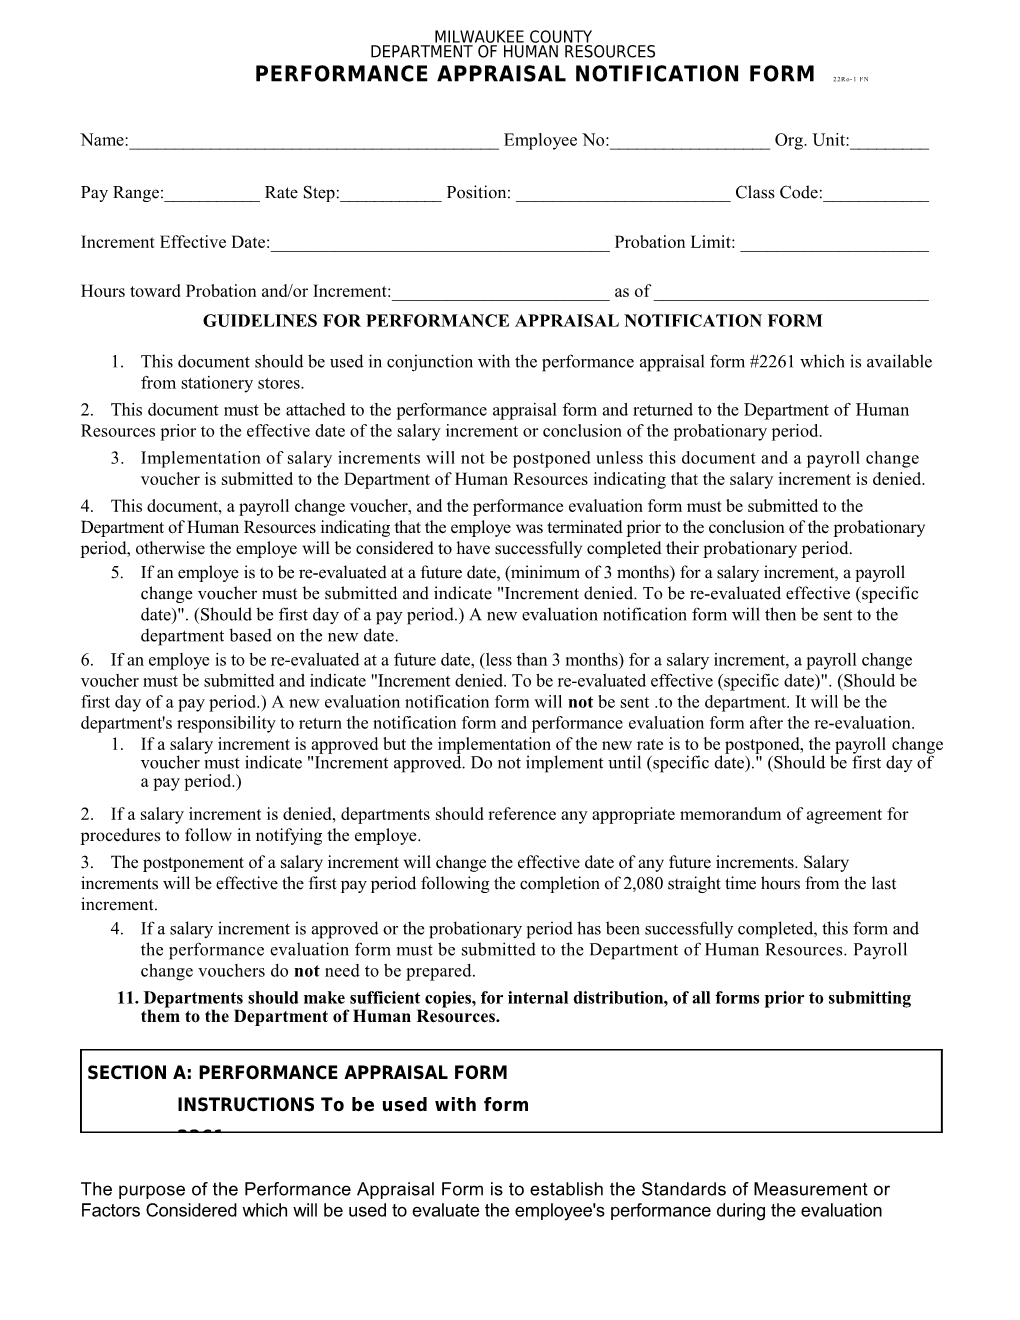 PERFORMANCE APPRAISAL NOTIFICATION FORM 22Ro-1 FN